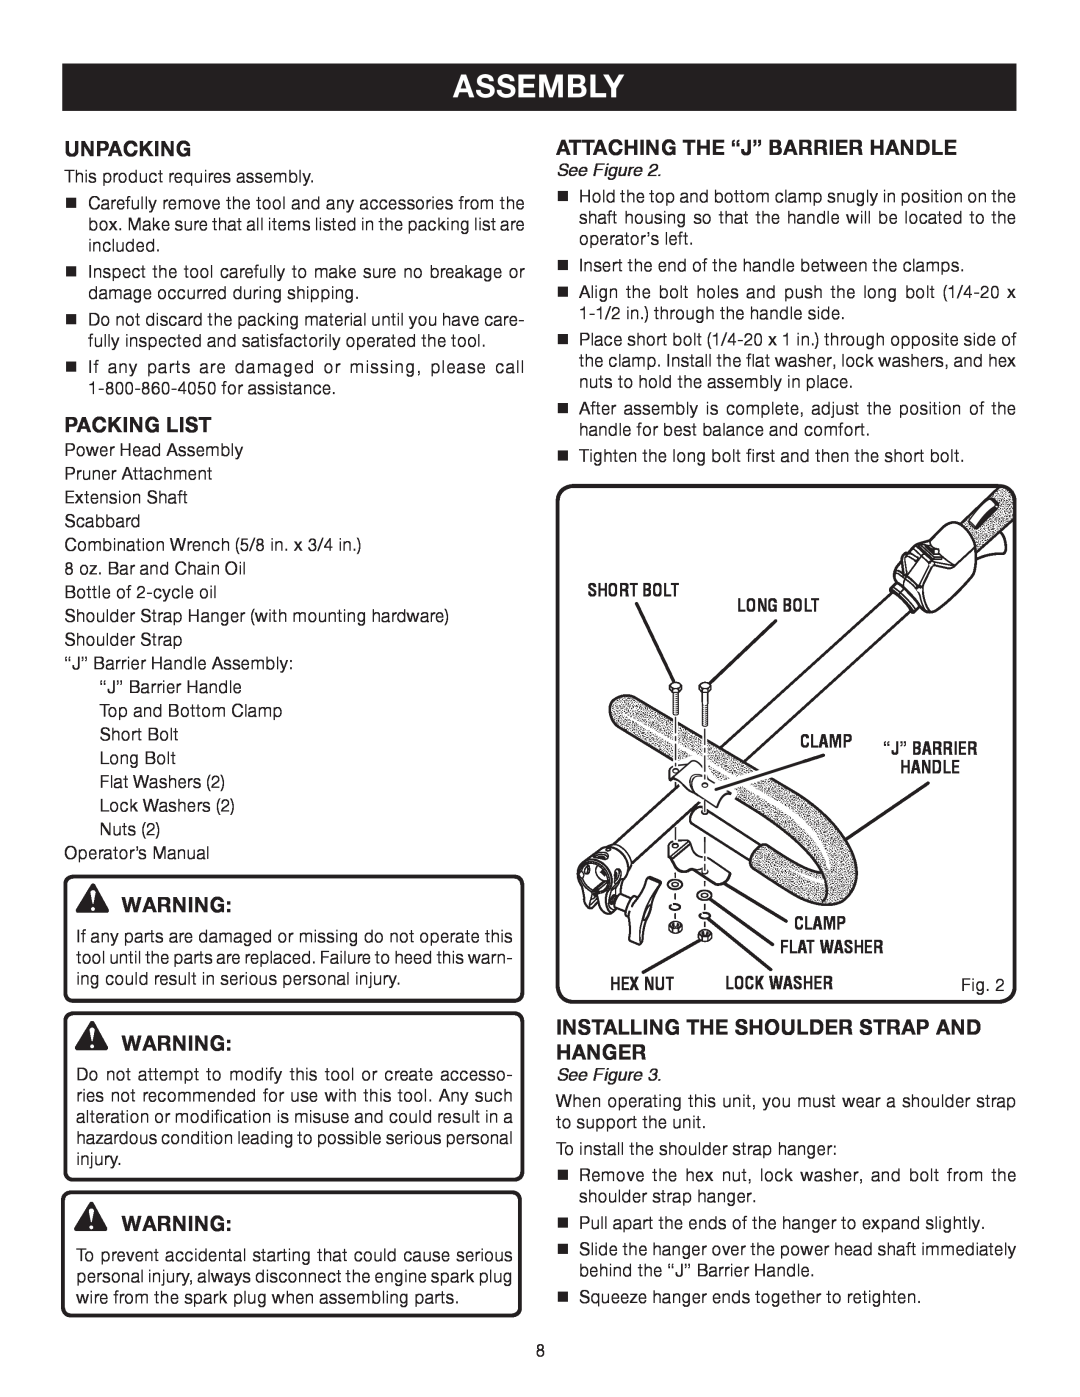 Ryobi RY52014 Assembly, Unpacking, Packing List, Attaching The “J” Barrier Handle, See Figure, Short Bolt Long Bolt, Clamp 